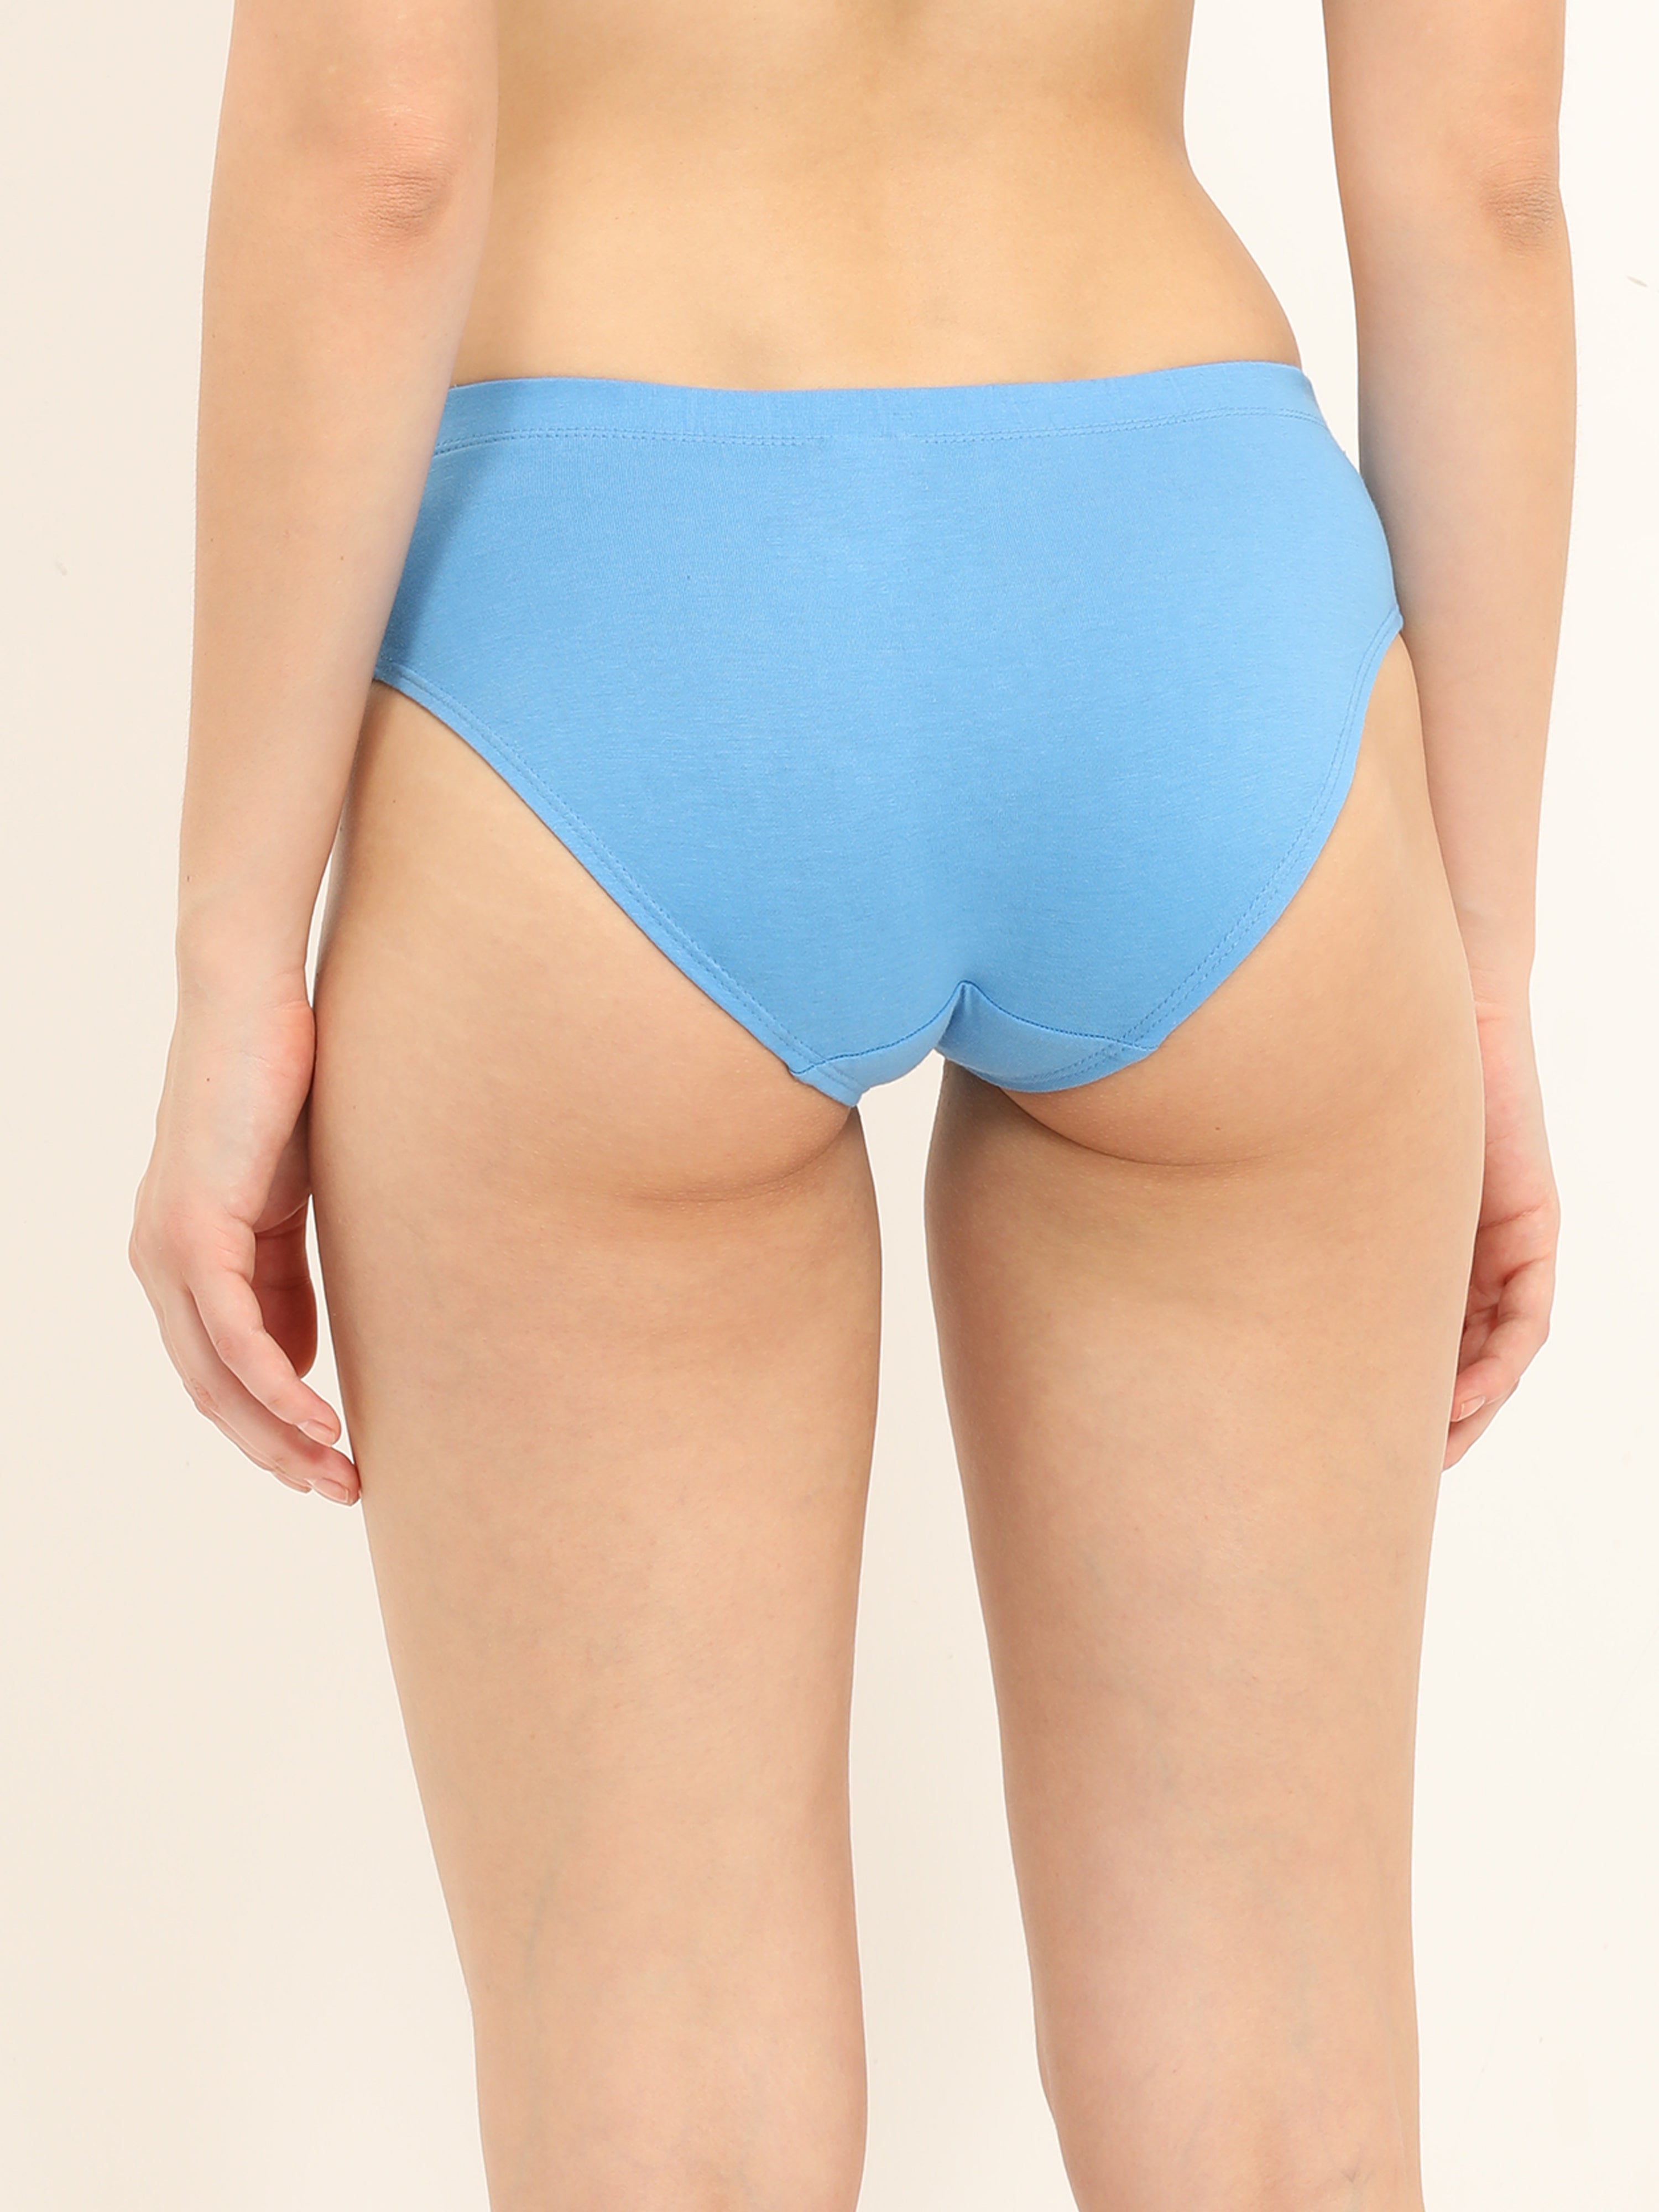 Envie Brief, Low rise panty (Pack of 3) Combo Swedish blue, Anthra melange, Fusia